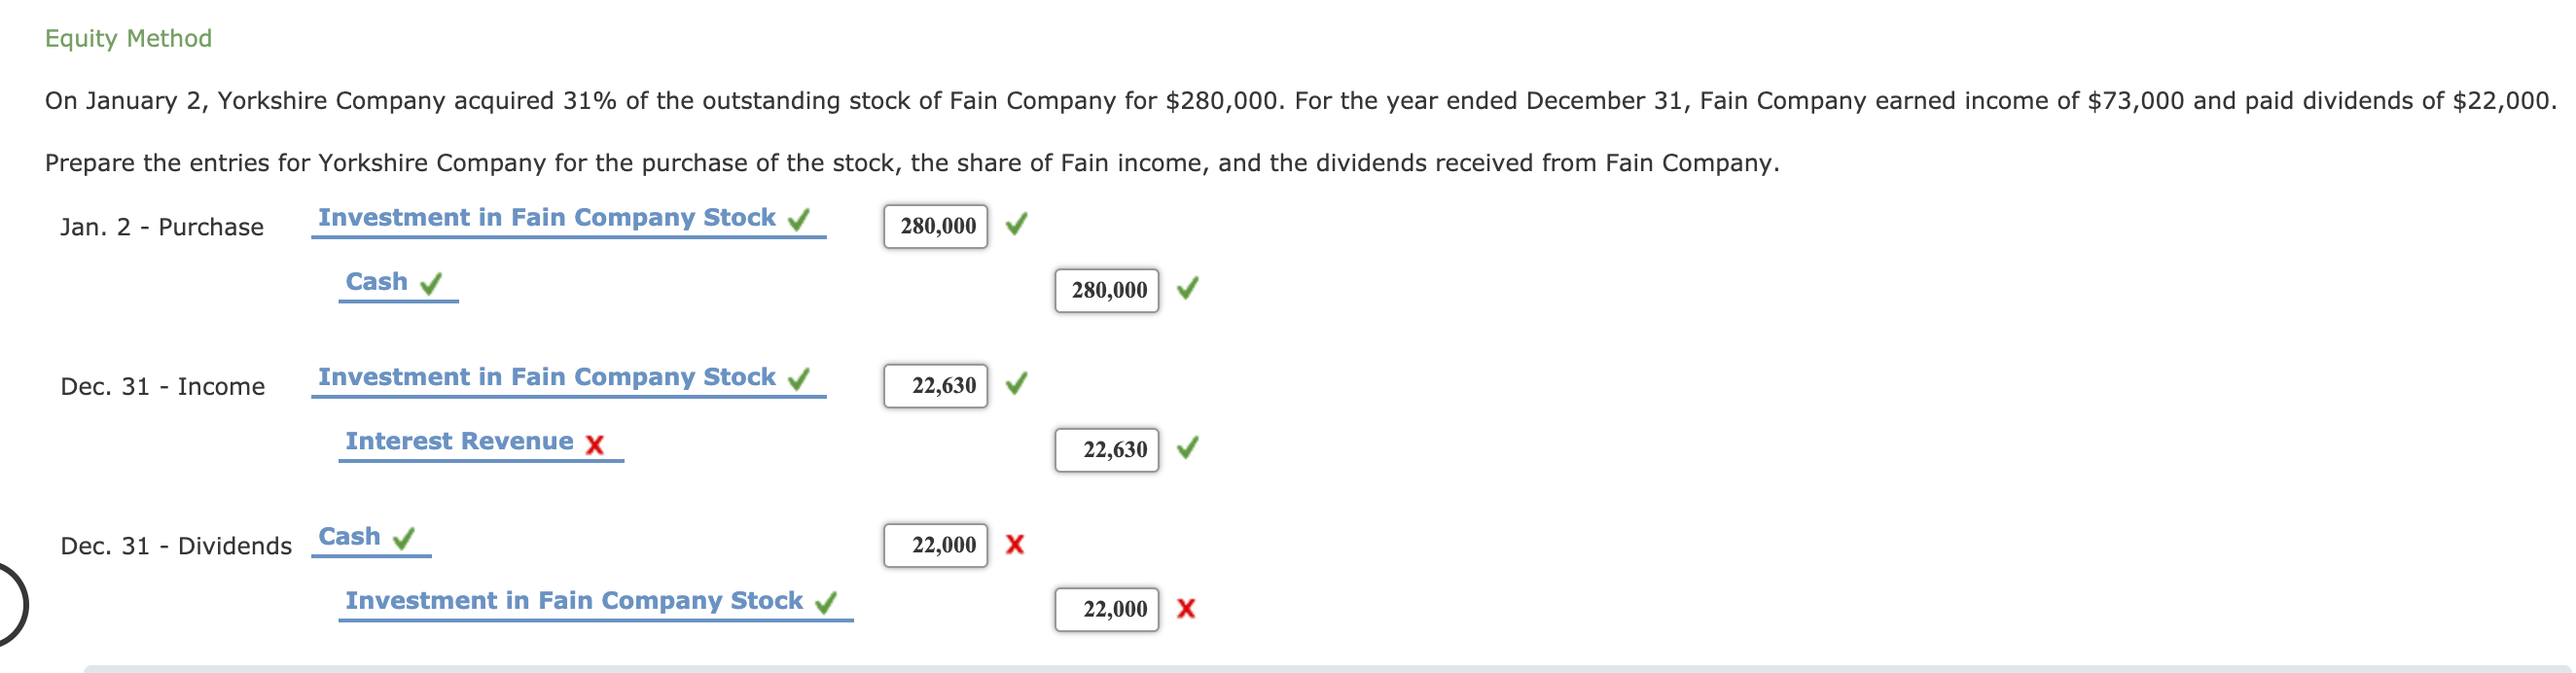 On January 2, Yorkshire Company acquired 31% of the outstanding stock of Fain Company for $280,000. For the year ended December 31, Fain Company earned income of $73,000 and paid dividends of $22,000.
Prepare the entries for Yorkshire Company for the purchase of the stock, the share of Fain income, and the dividends received from Fain Company.
Jan. 2 - Purchase
Investment in Fain Company Stock
280,000
Cash v
280,000
Investment in Fain Company Stock v
22,630
Dec. 31 - Income
Interest Revenue x
22,630
Dec. 31 - Dividends
Cash v
22,000
Investment in Fain Company Stock v
22,000 X
